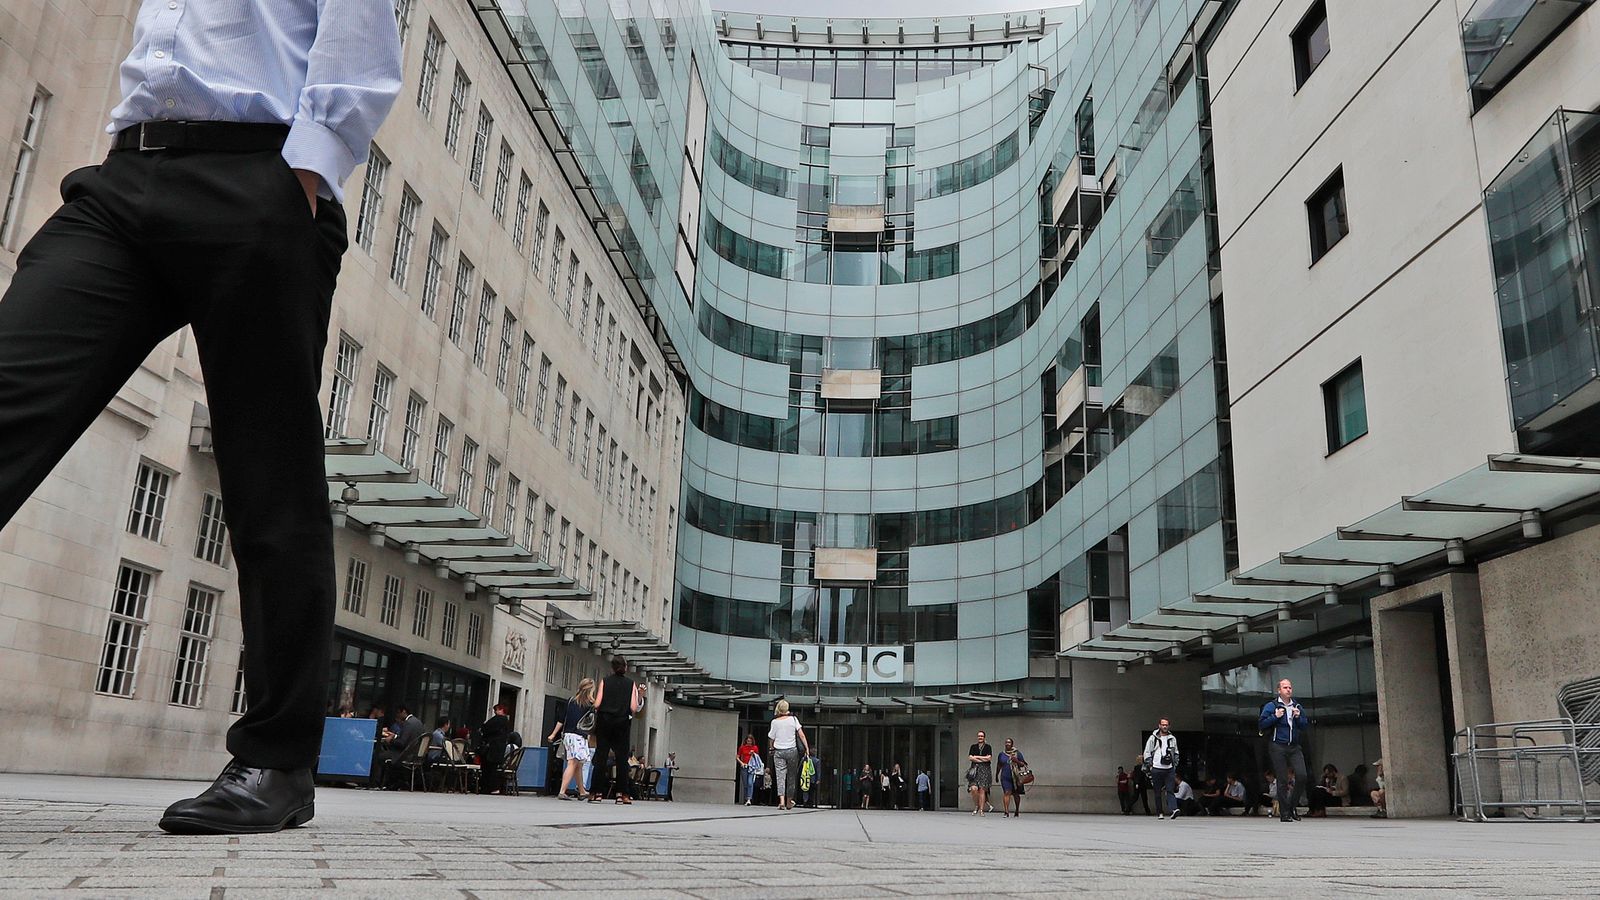 BBC presenter scandal: Young person's mother stands by claims after lawyer insists 'nothing inappropriate' happened with star